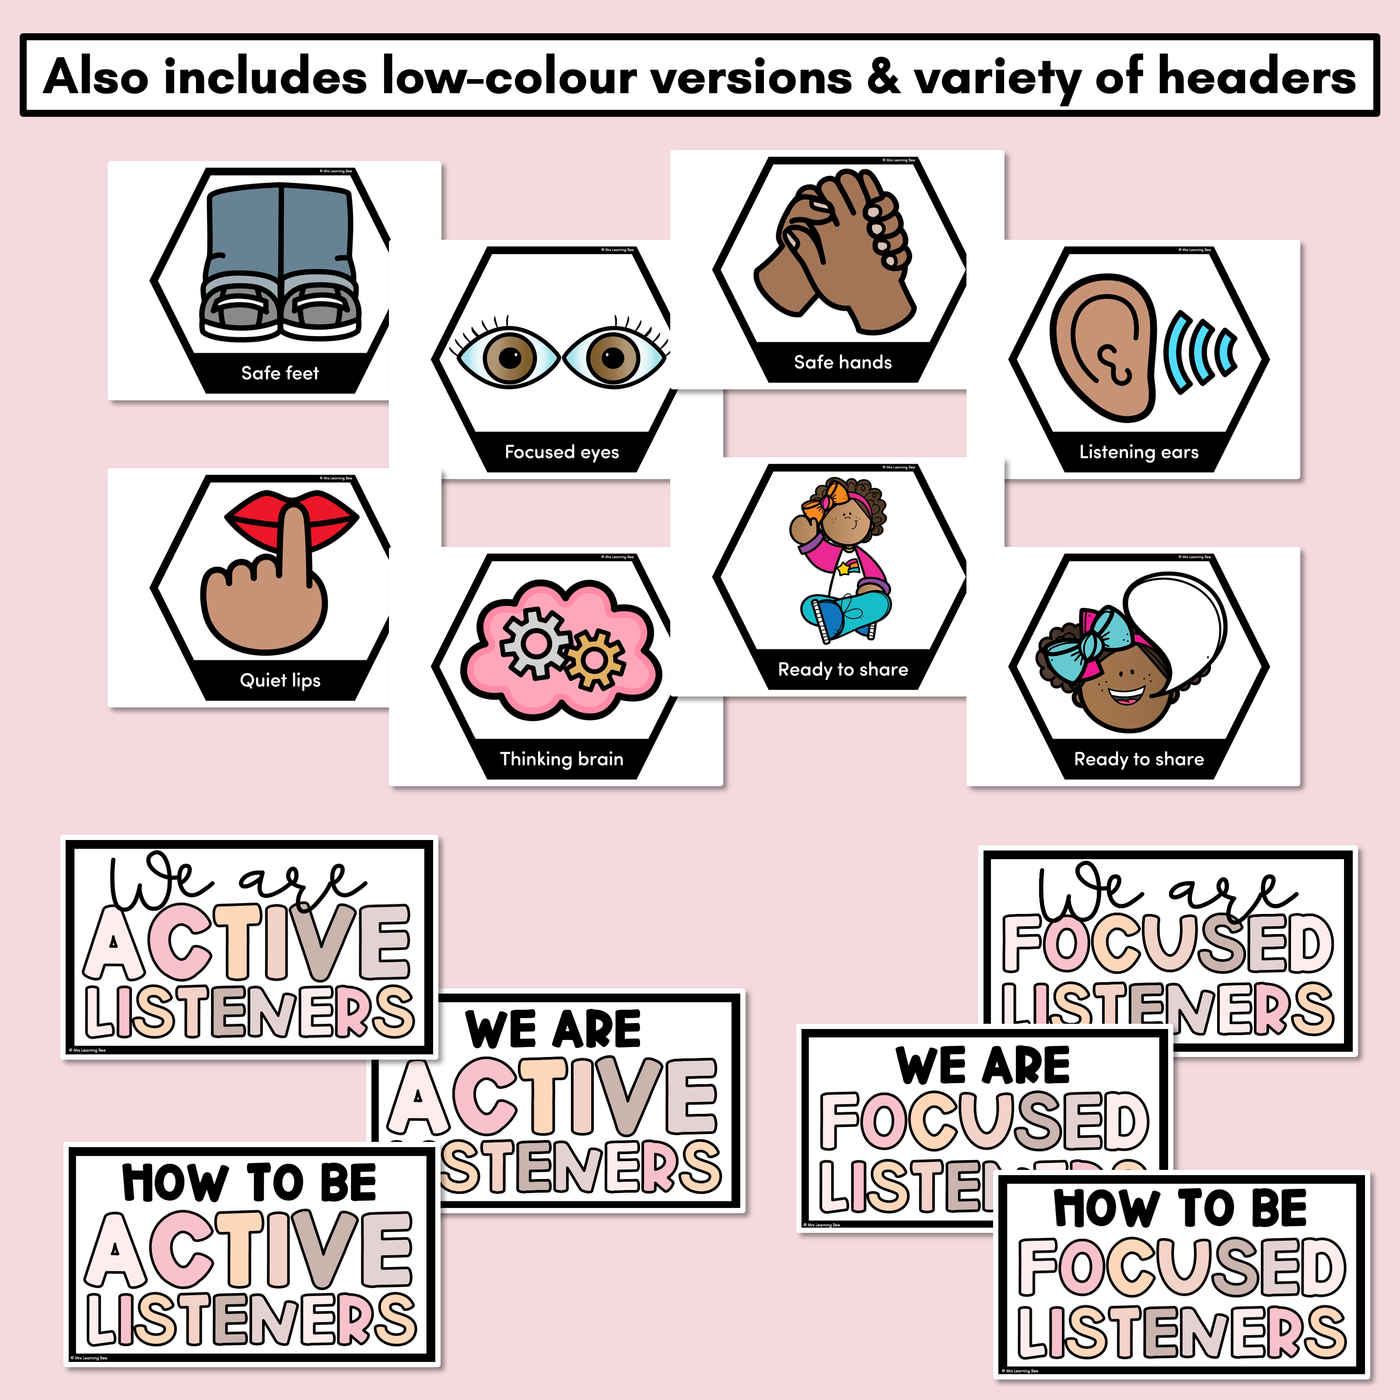 Focused/Active Listening Posters - Inclusive Display - Neutral